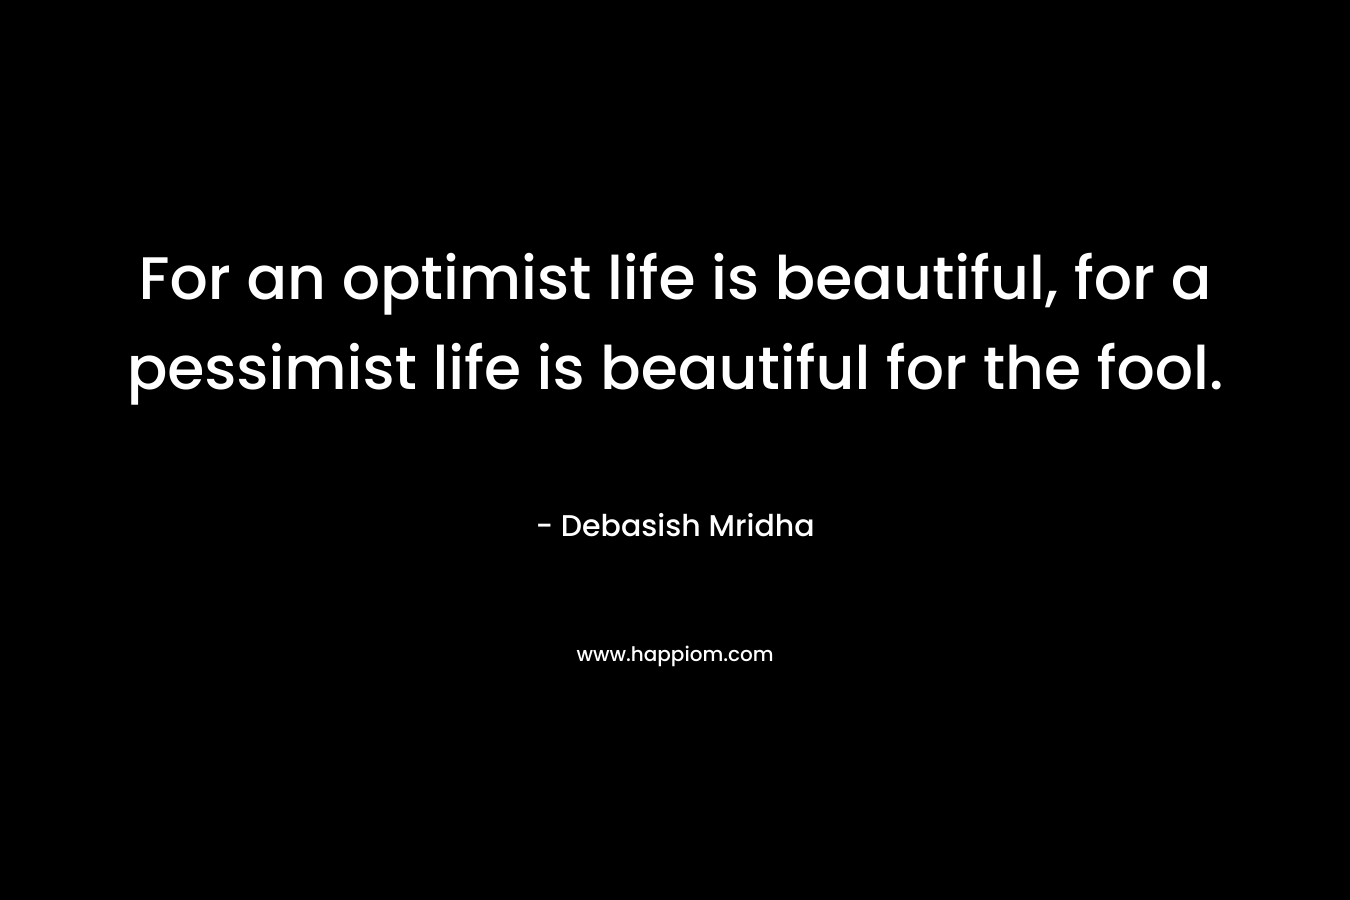 For an optimist life is beautiful, for a pessimist life is beautiful for the fool. – Debasish Mridha